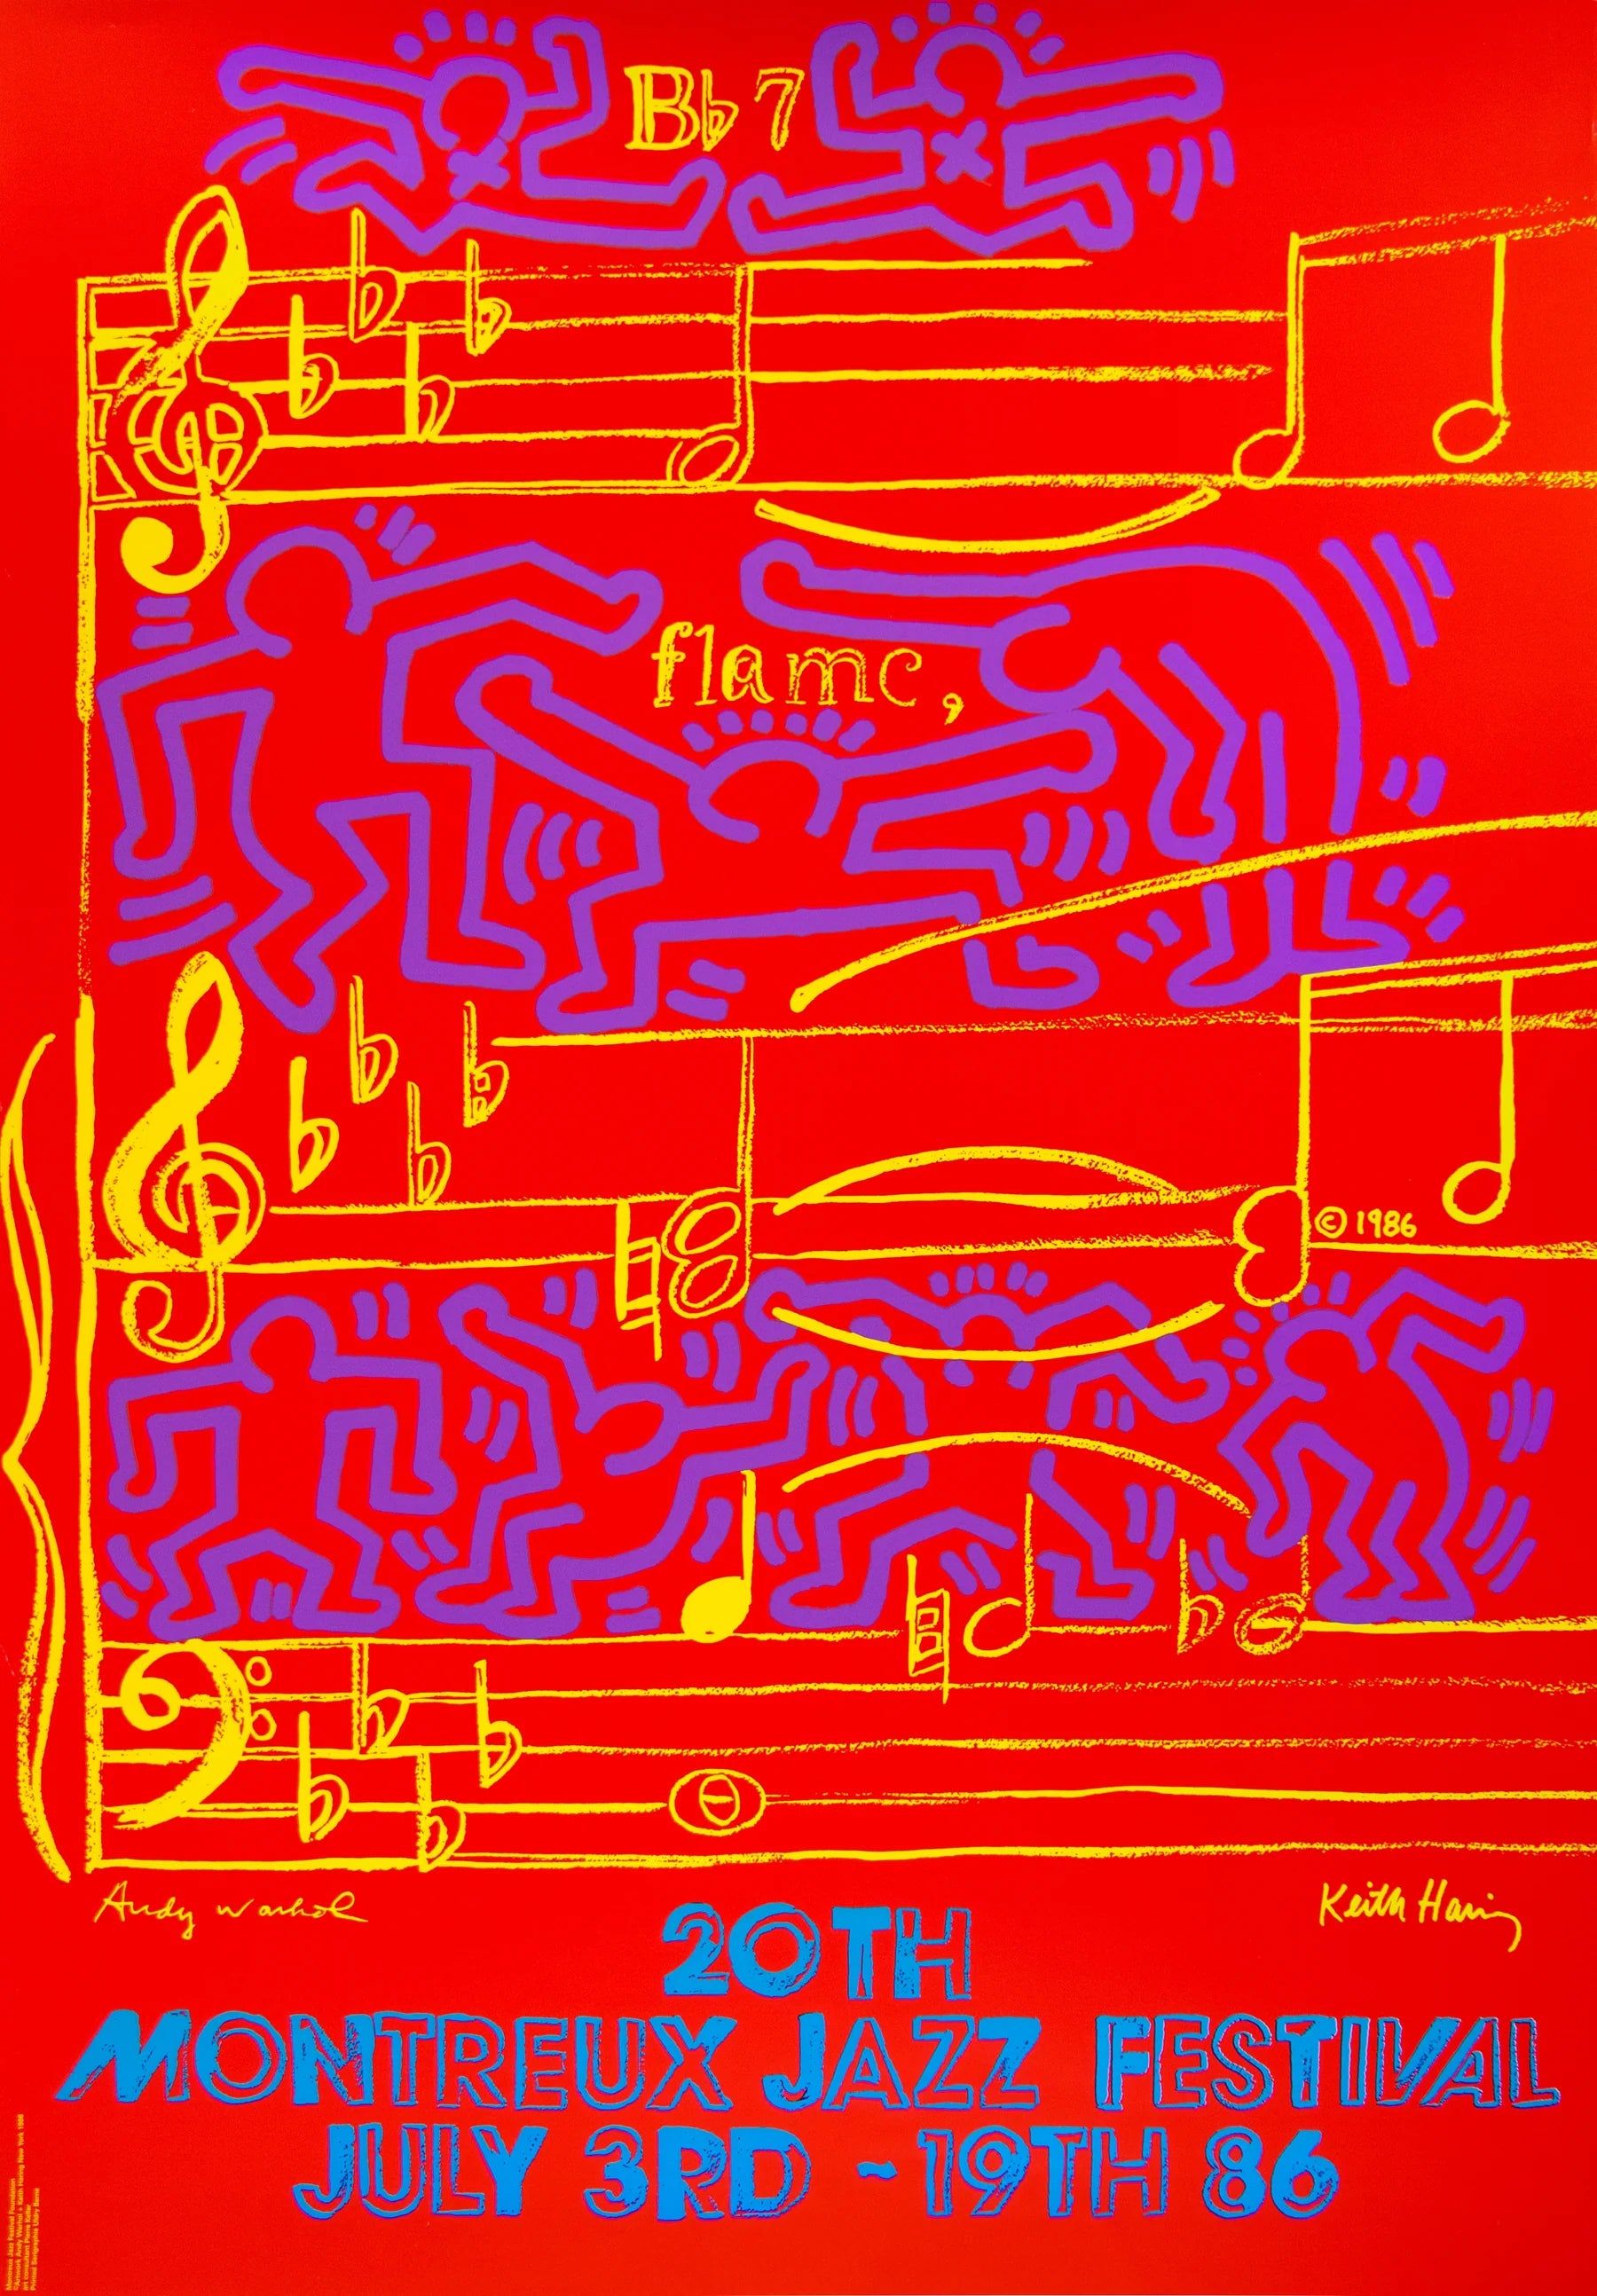 Andy Warhol & Keith Haring collaboration print with Keith Harings iconic style in the form of a violet silhoutte on a red bacground containing yellow musical notes which was Andy Warhols contribution for the print